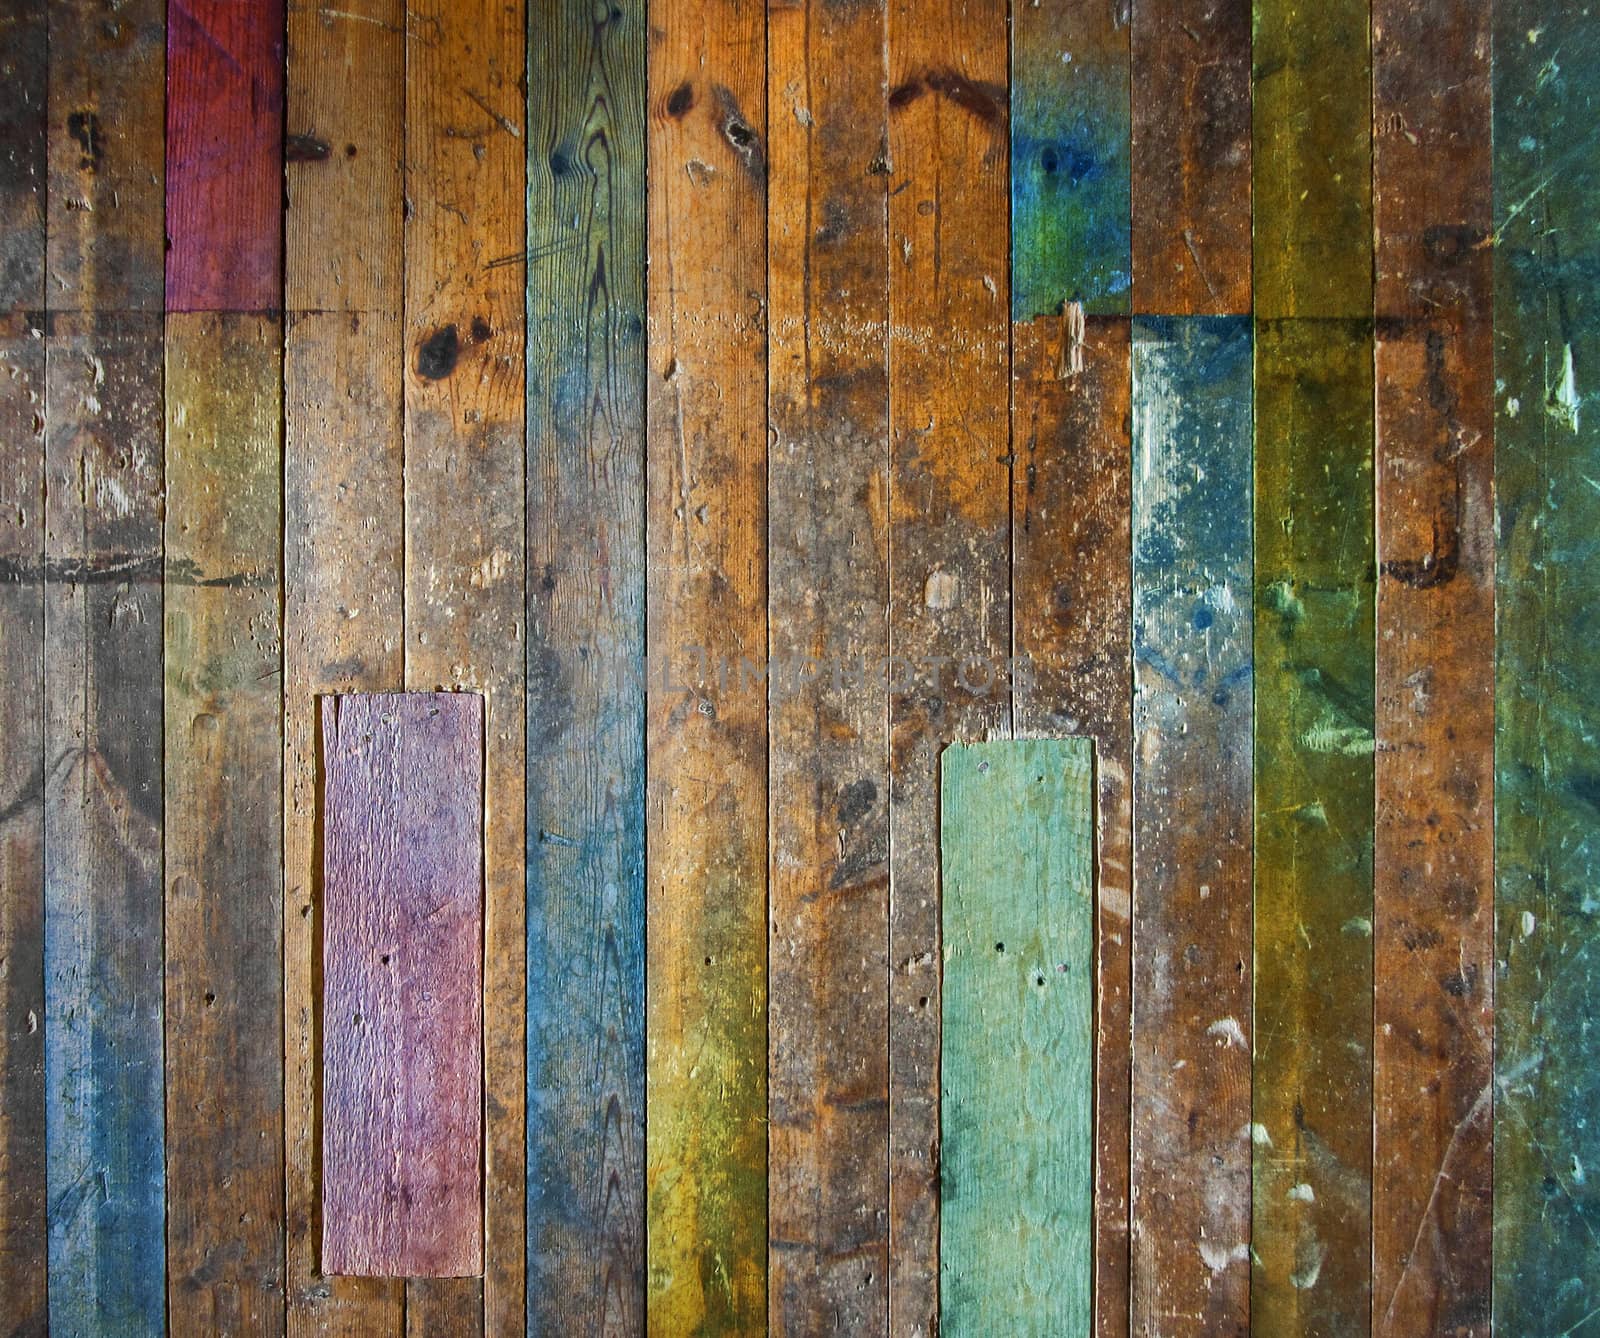 Colorful old wooden floor or wall by anterovium